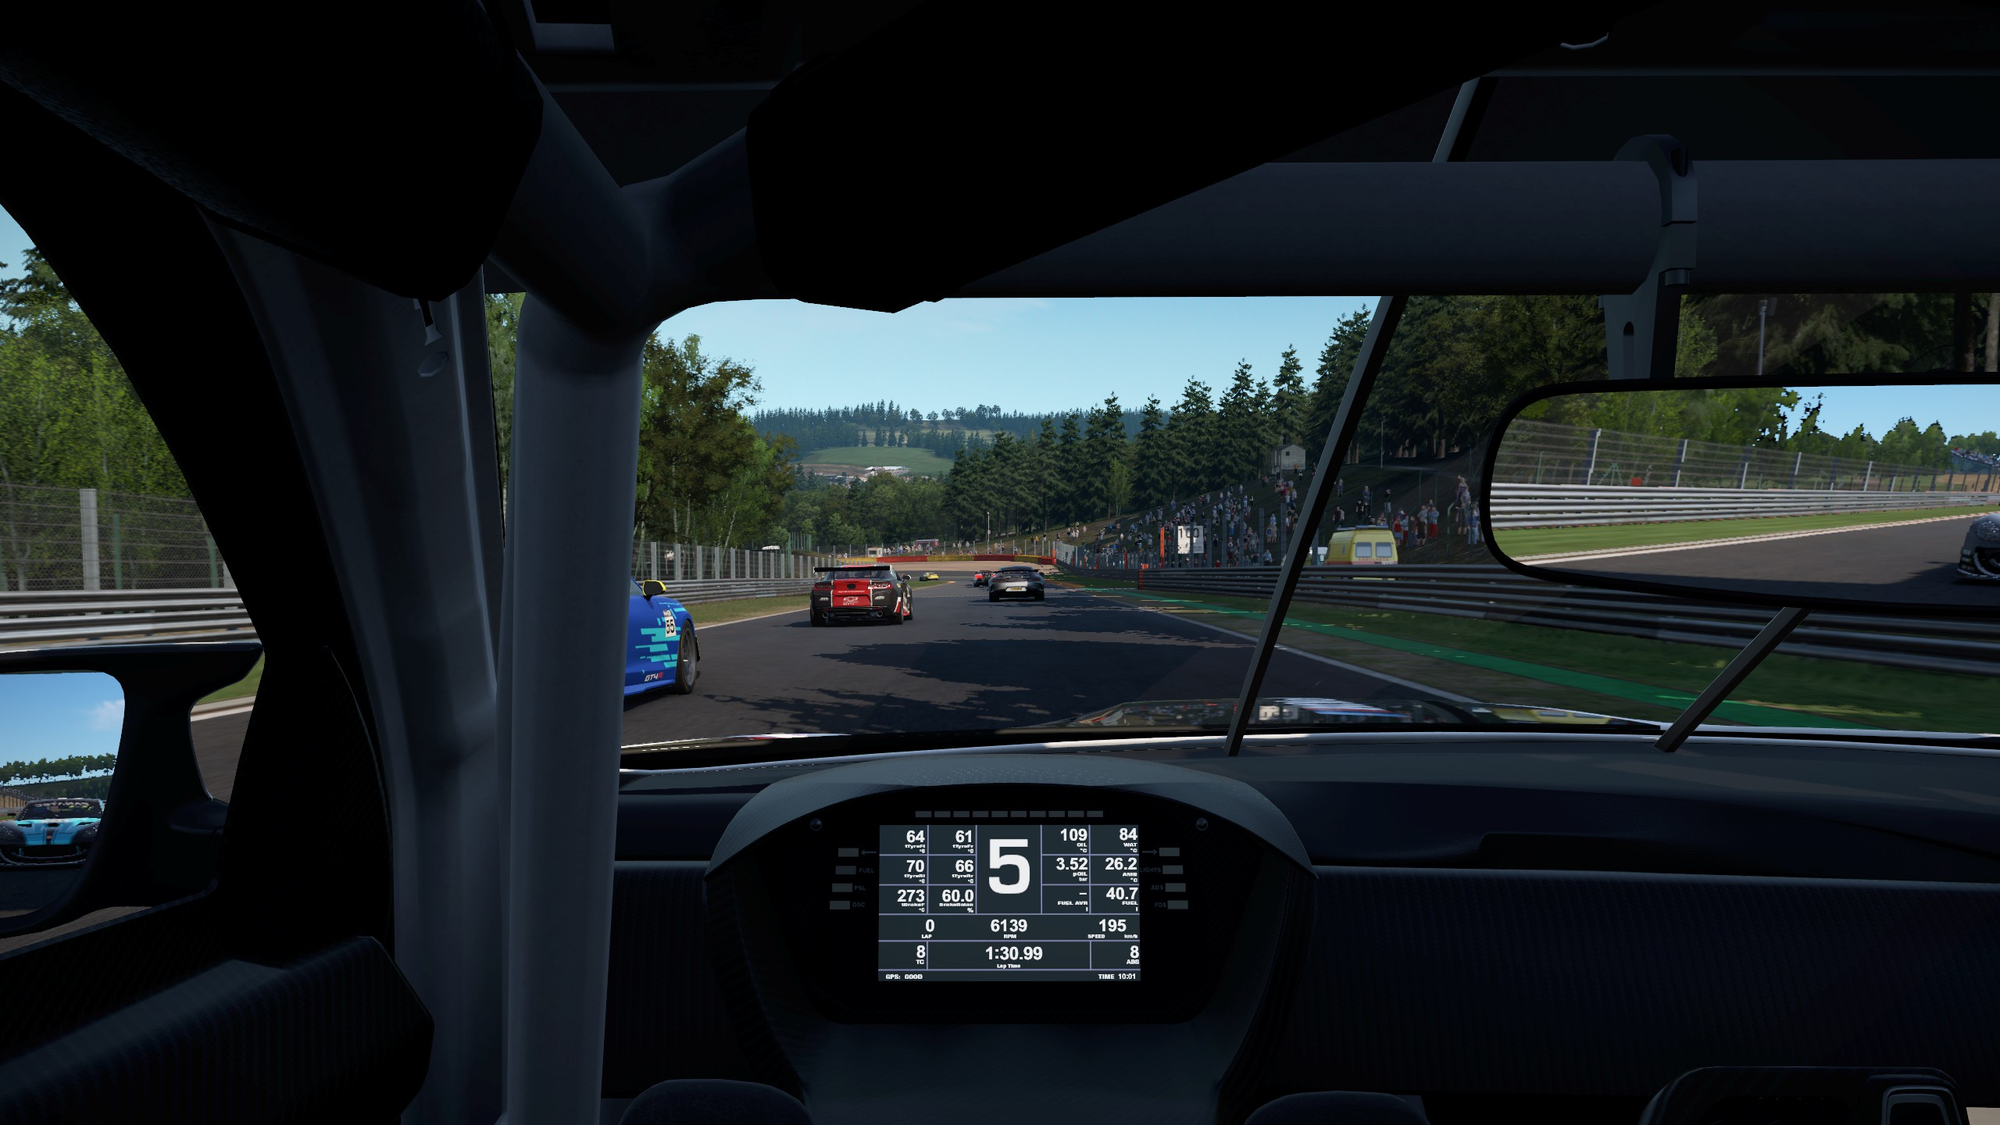 A screenshot of Automobilista 2 at Spa-Francorchamps, during a GT race